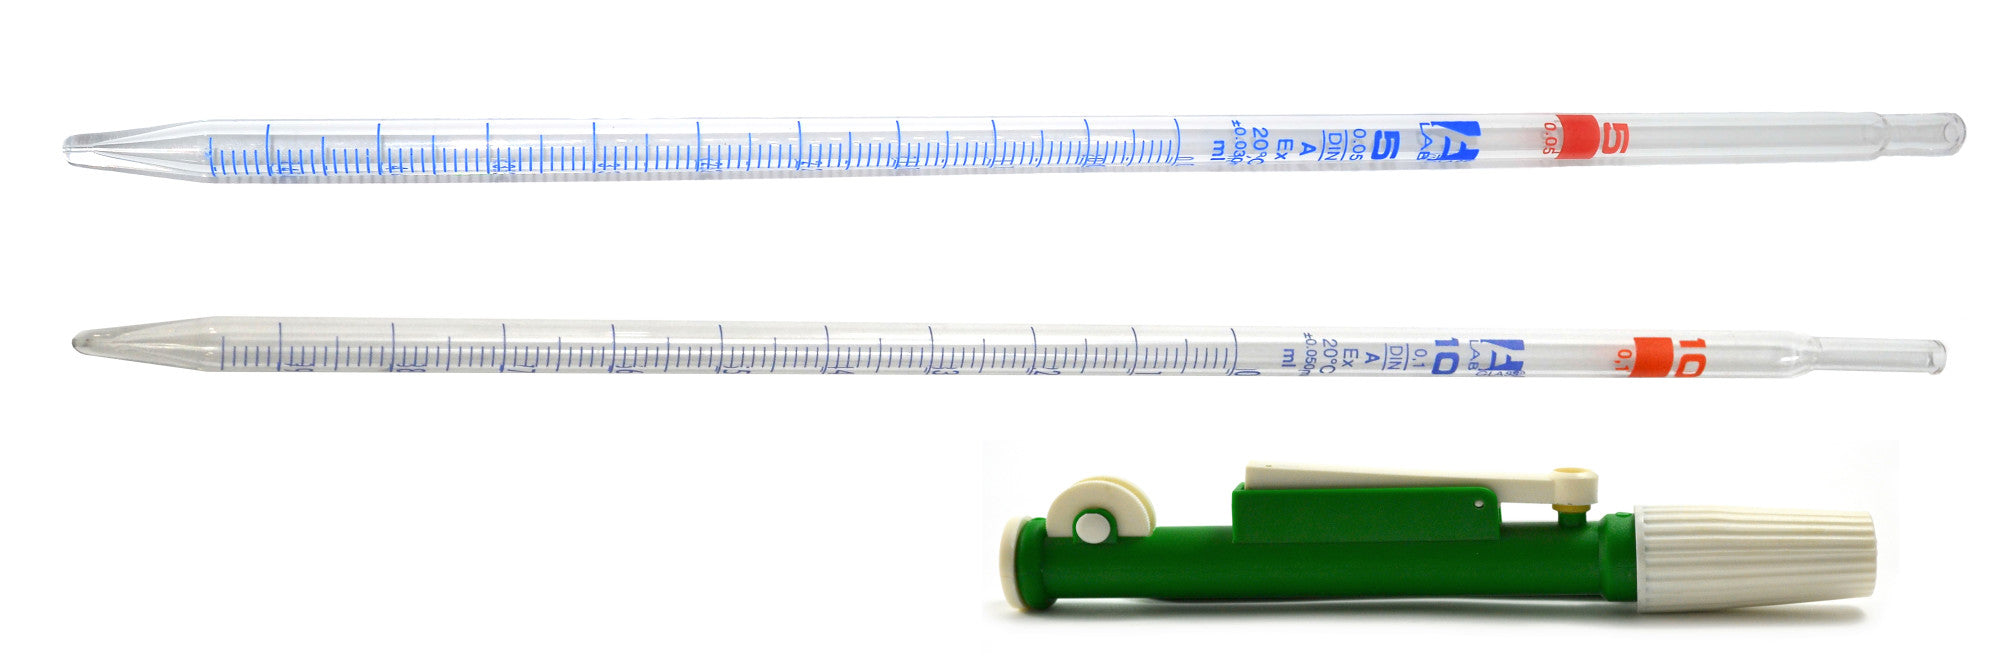 Serological Pipette Set with Pump -  5mL Pipette (Red), 10mL Pipette (Green), 10mL Pipette Pump